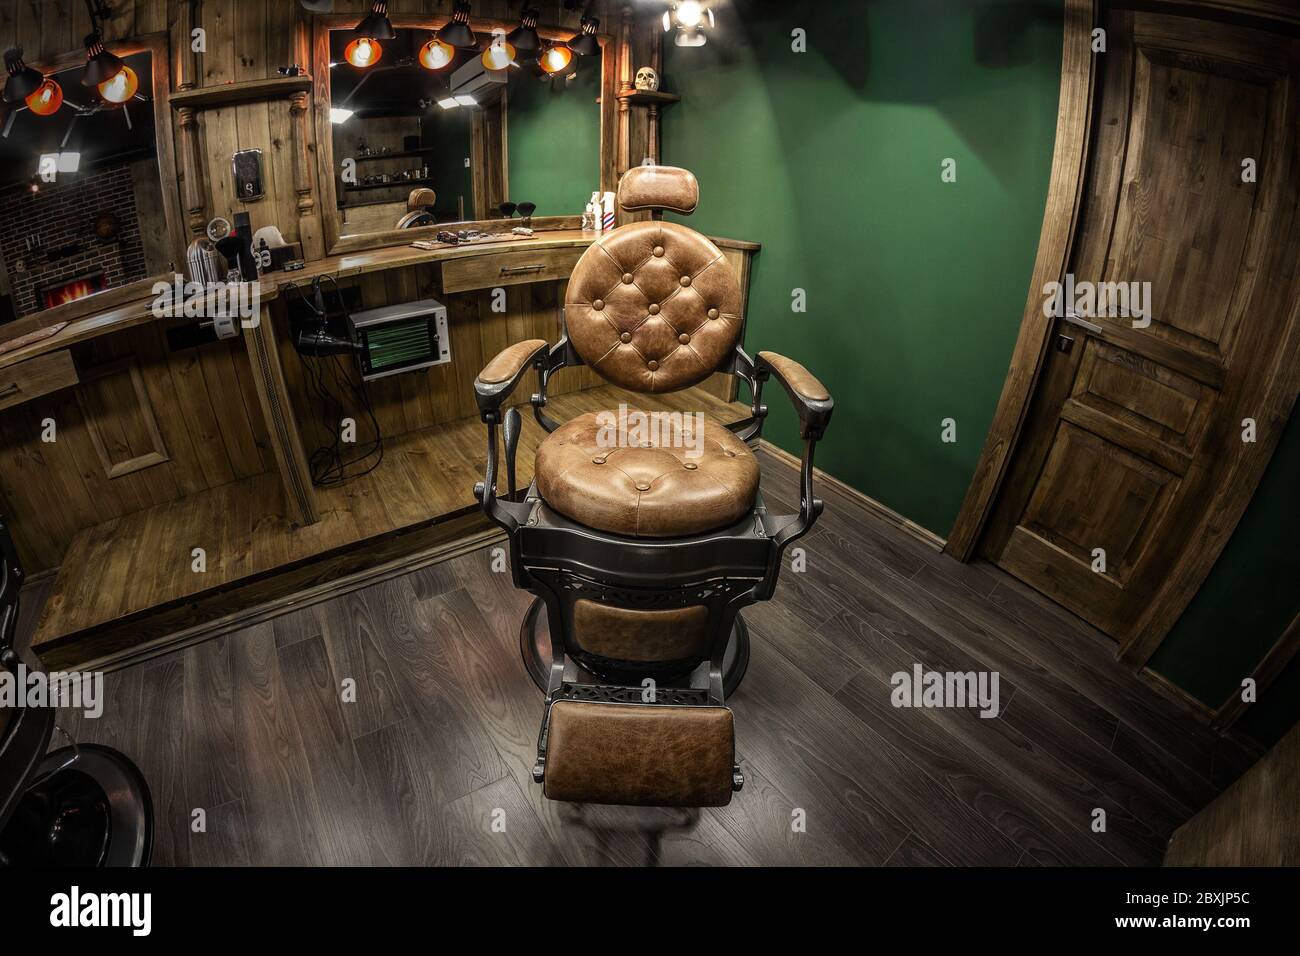 Vintage barbershop chair in the spotlight. Brown authentic interior with wood elements, tasteful design Stock Photo